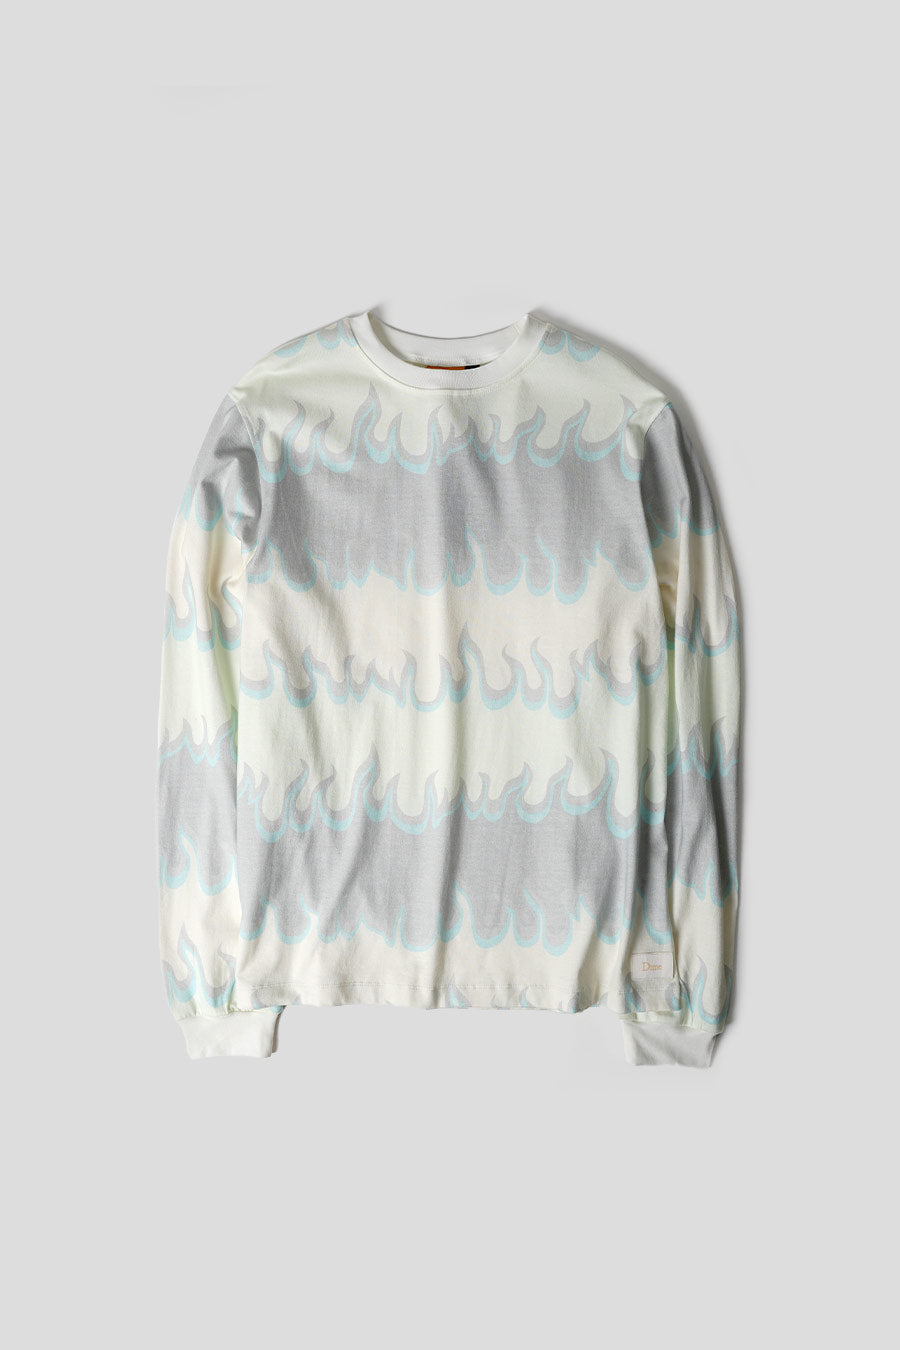 Dime - SPACE FLAME WHITE LONG-SLEEVED T-SHIRT - LE LABO STORE